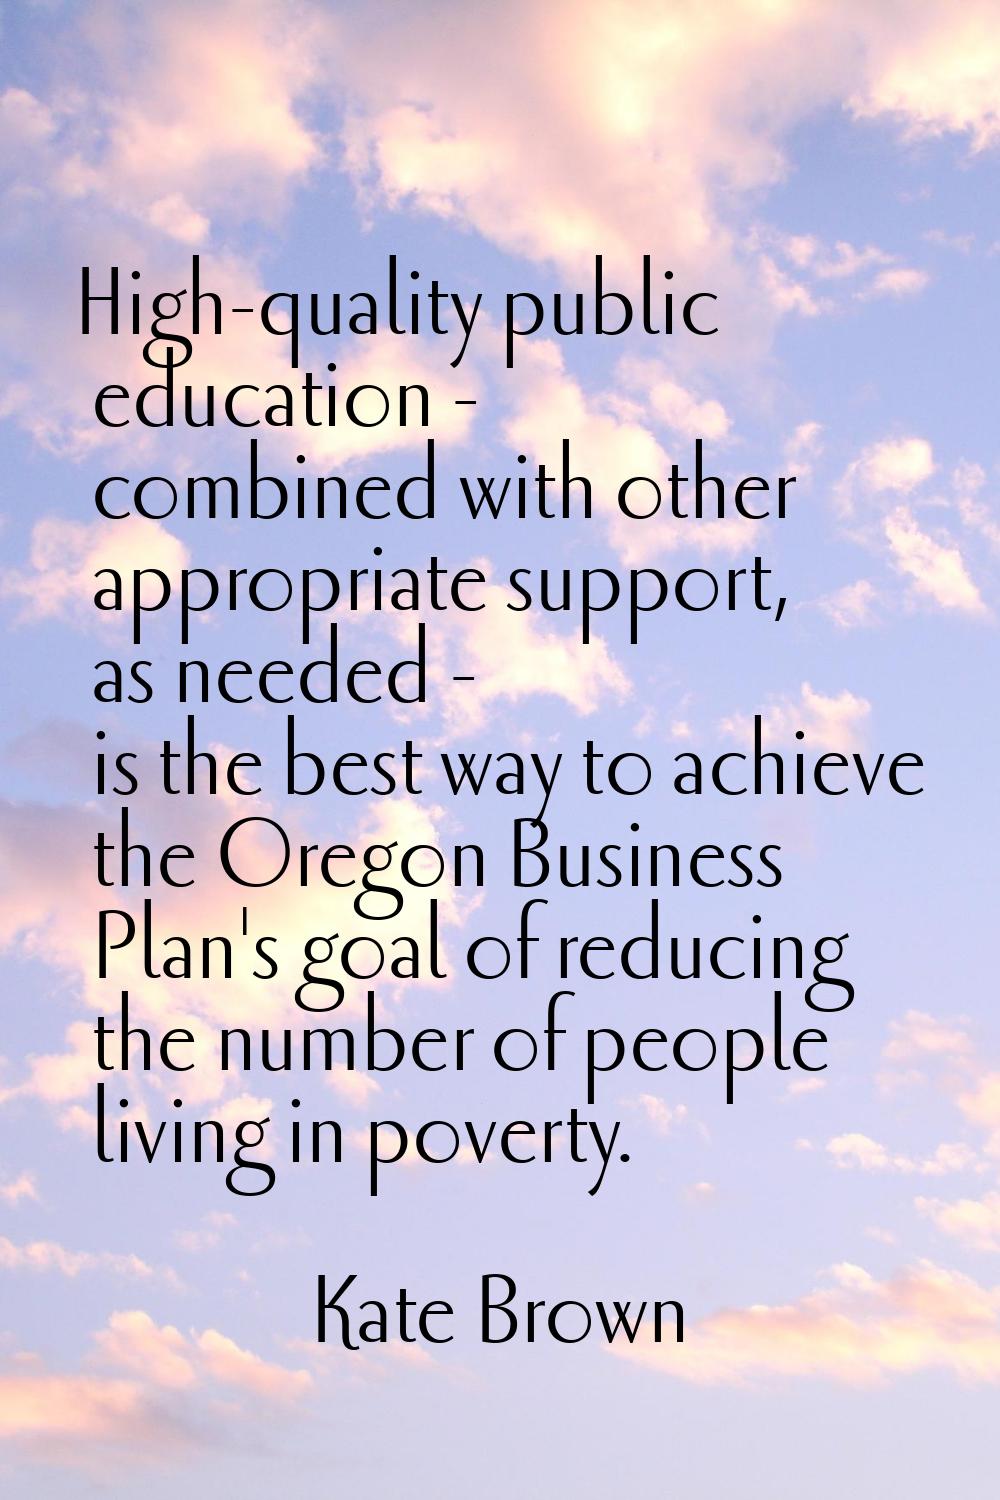 High-quality public education - combined with other appropriate support, as needed - is the best wa